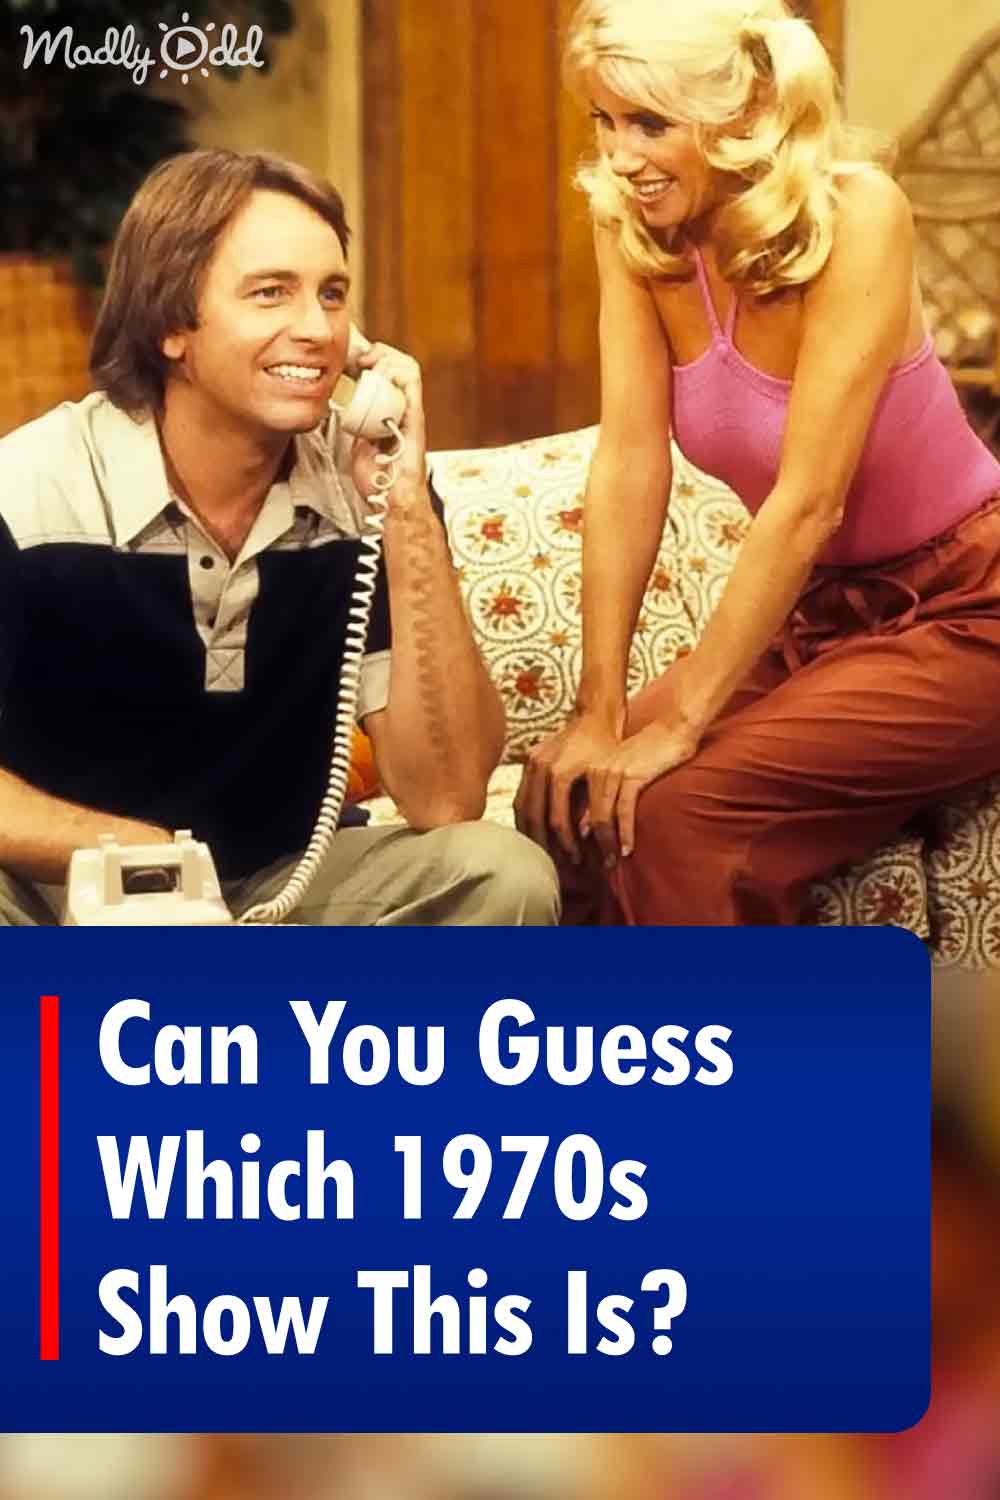 Can You Guess Which 1970s Show This Is?